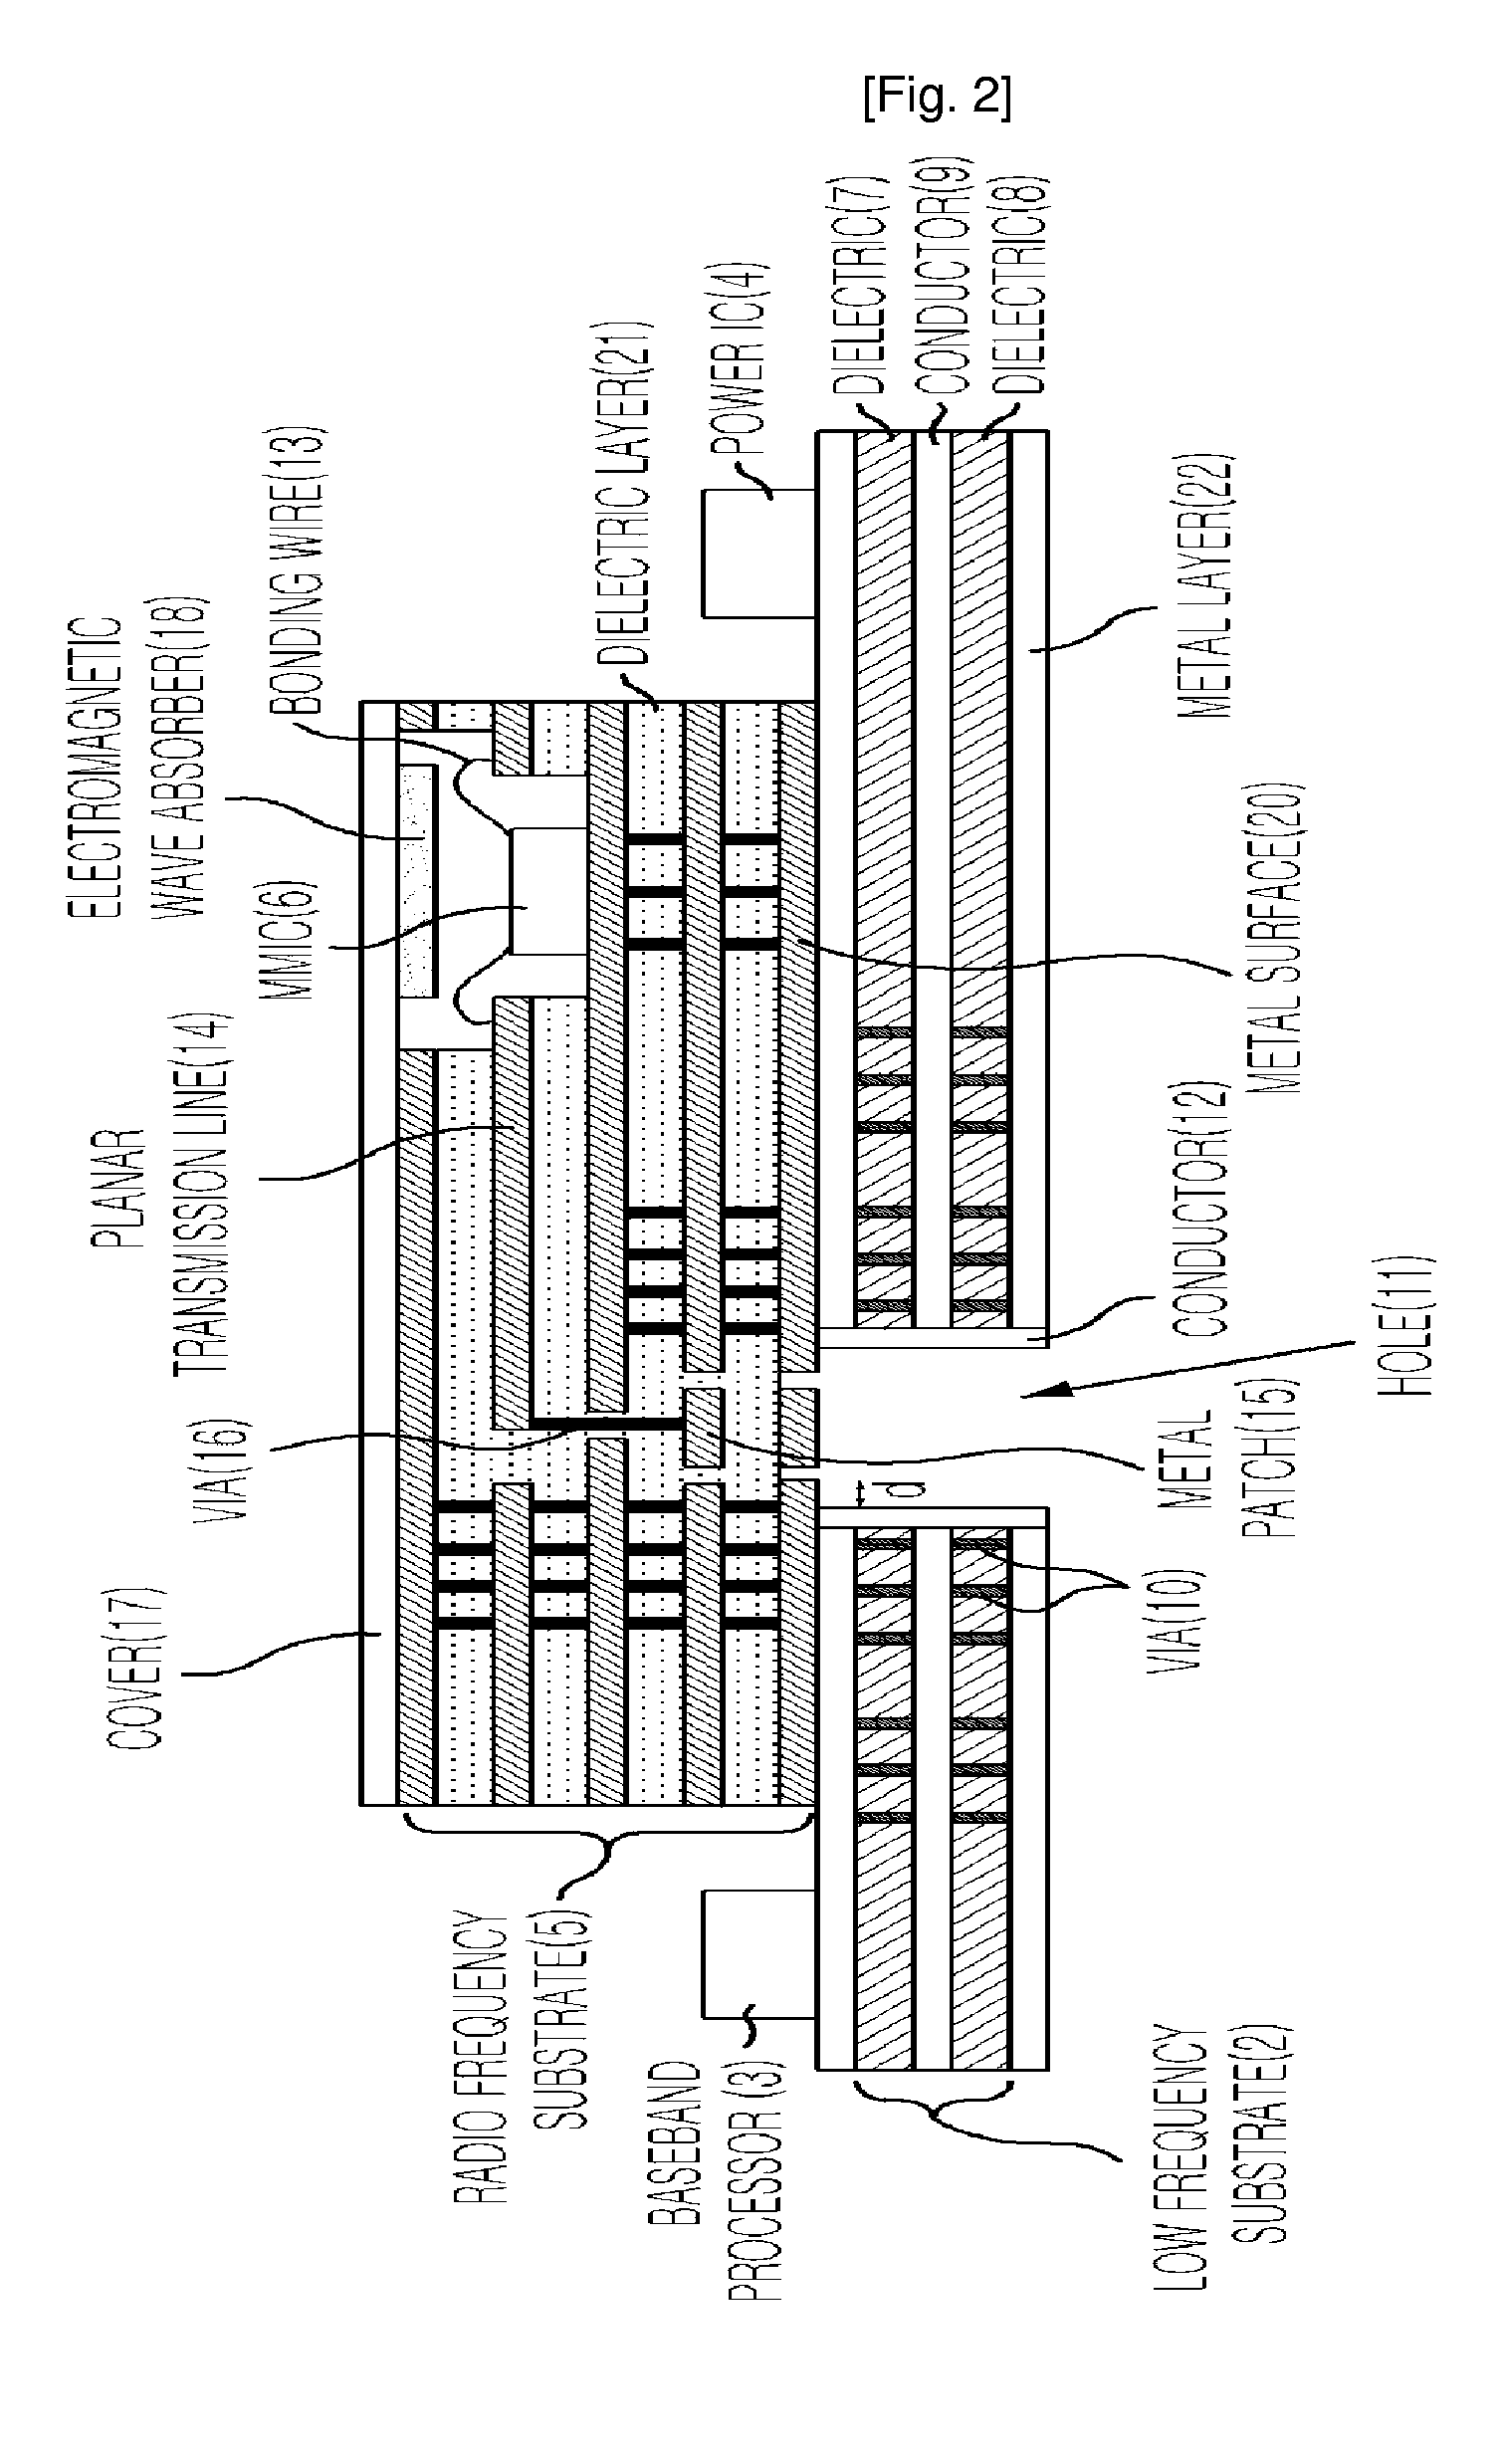 Mode Transition Circuit for Transferring Radio Frequency Signal and Transceiver Module Having the Same